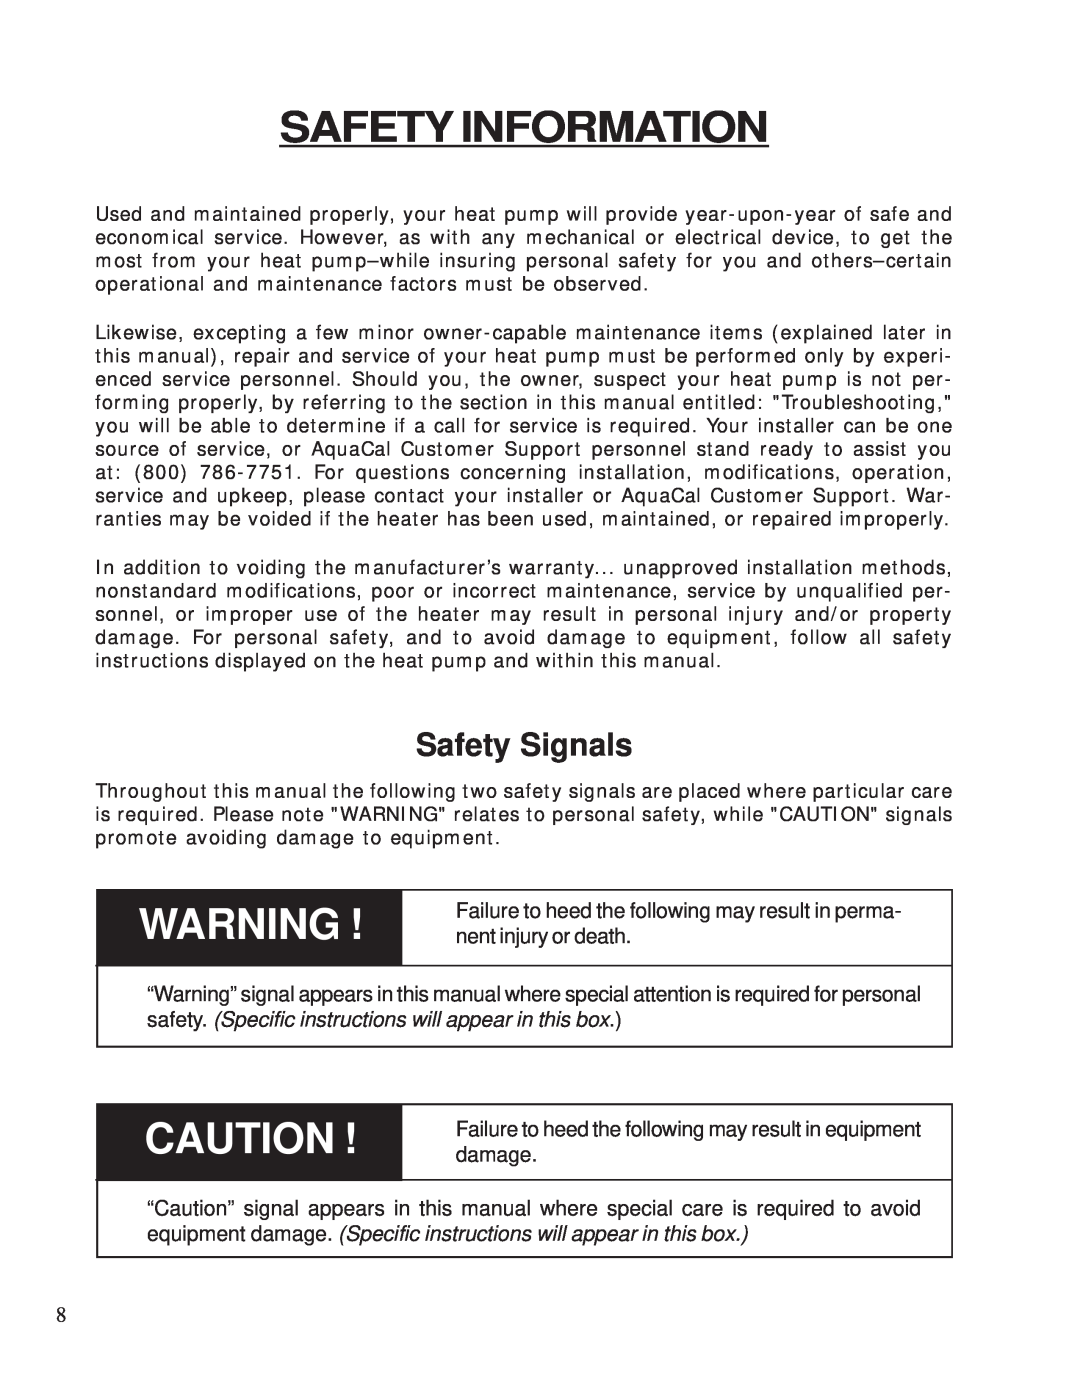 Aquacal 155, 120 owner manual Safety Information, Safety Signals 